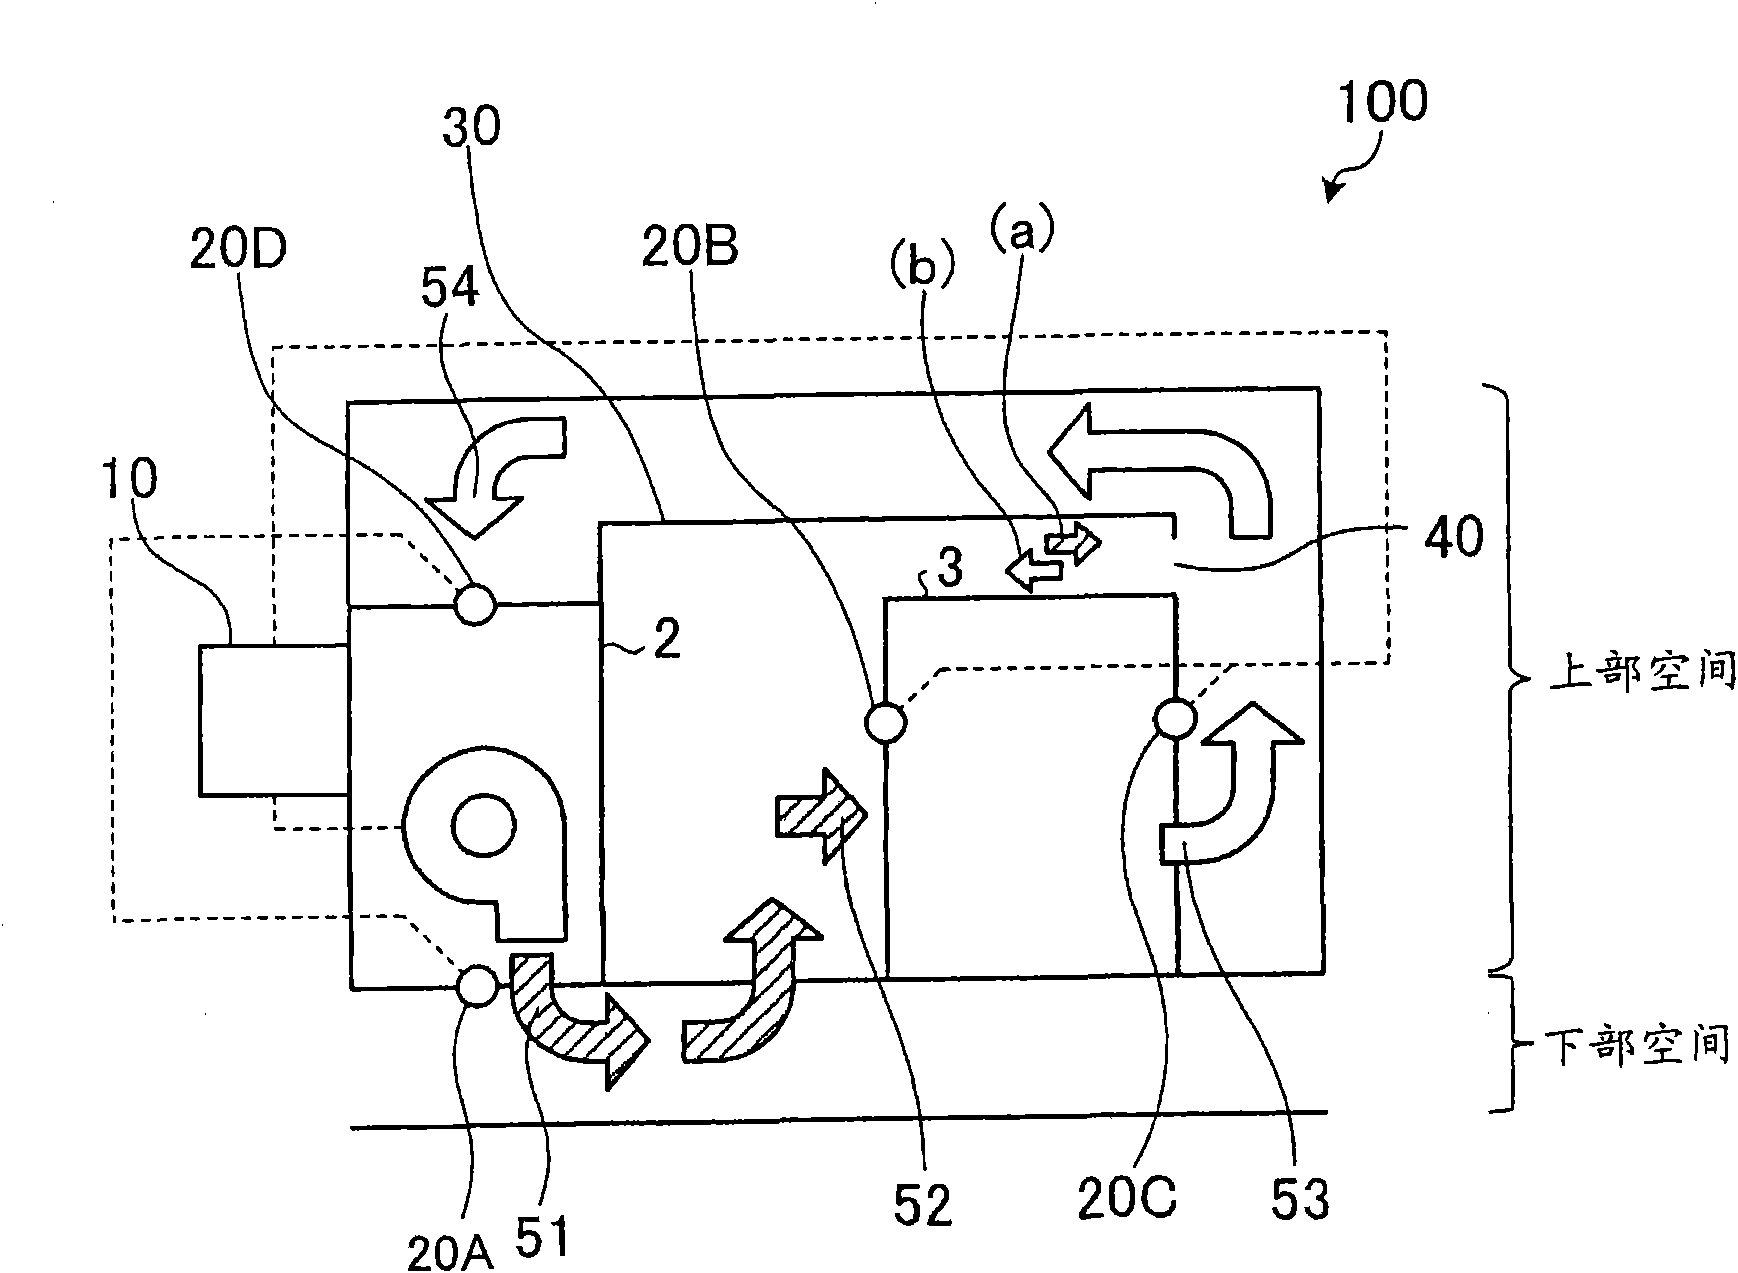 Air conditioning installation and control method